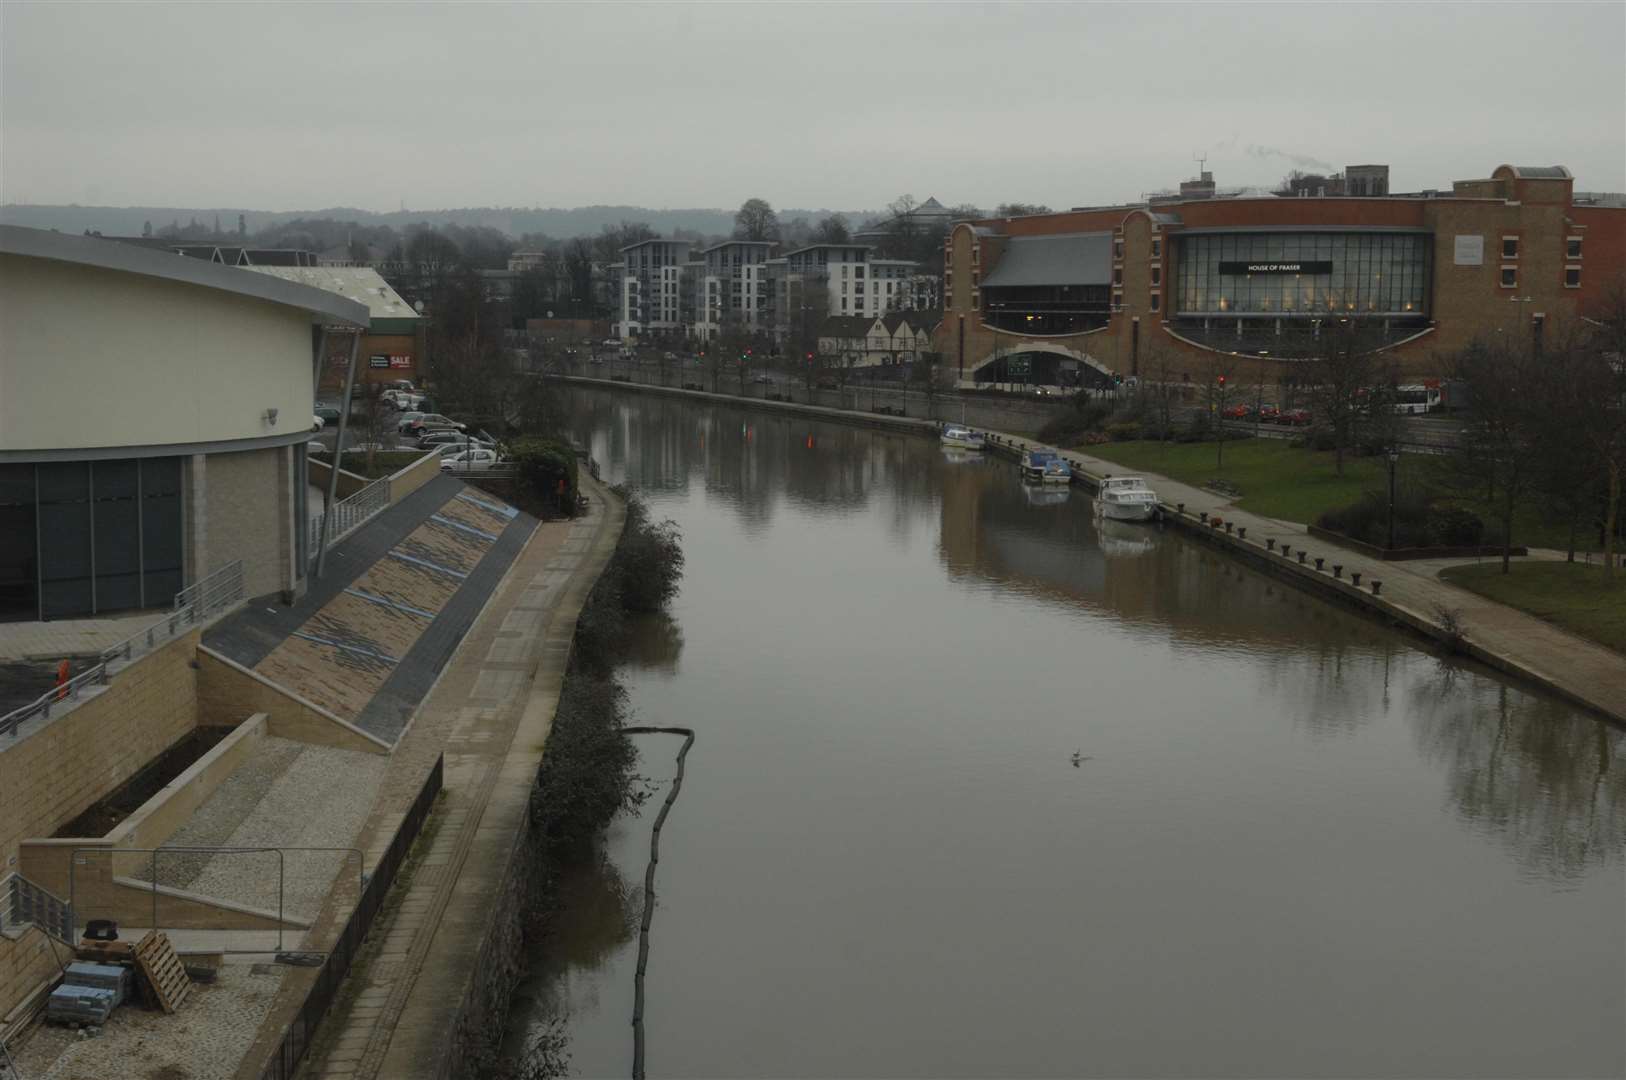 Police officers saved a man from the River Medway near Fairmeadow